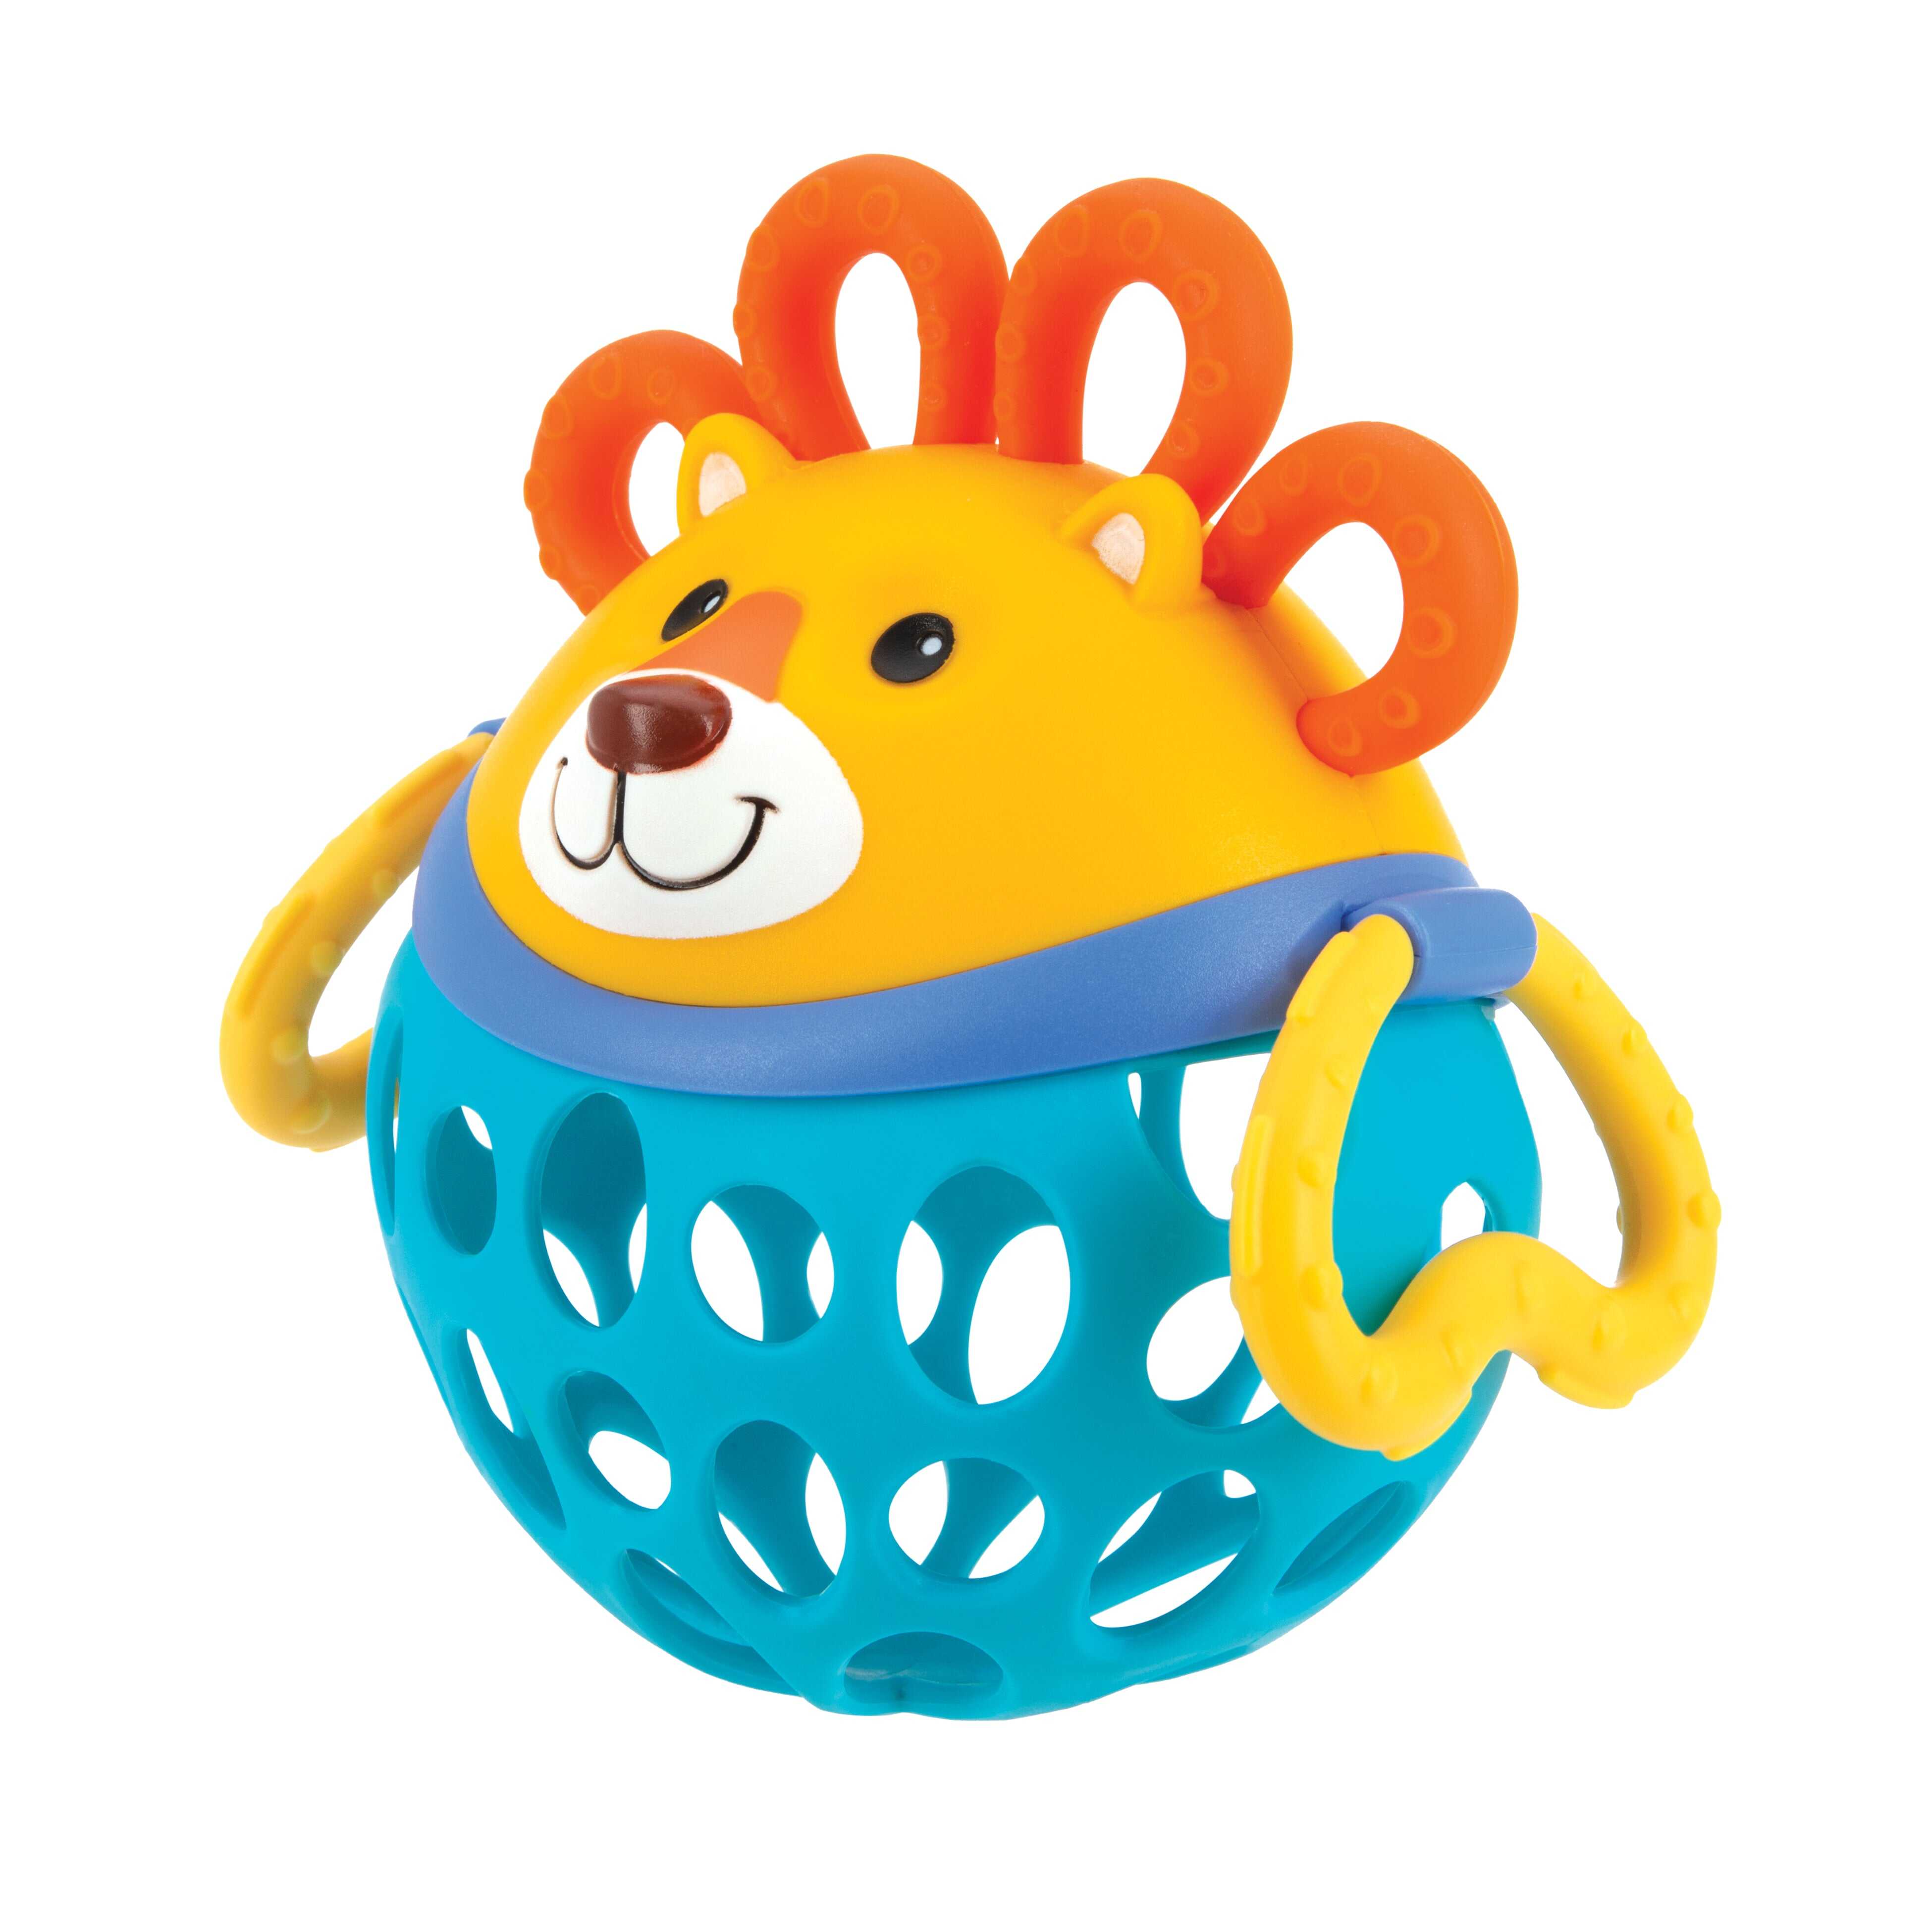 Silly Shaker Rattle Toy - Lion